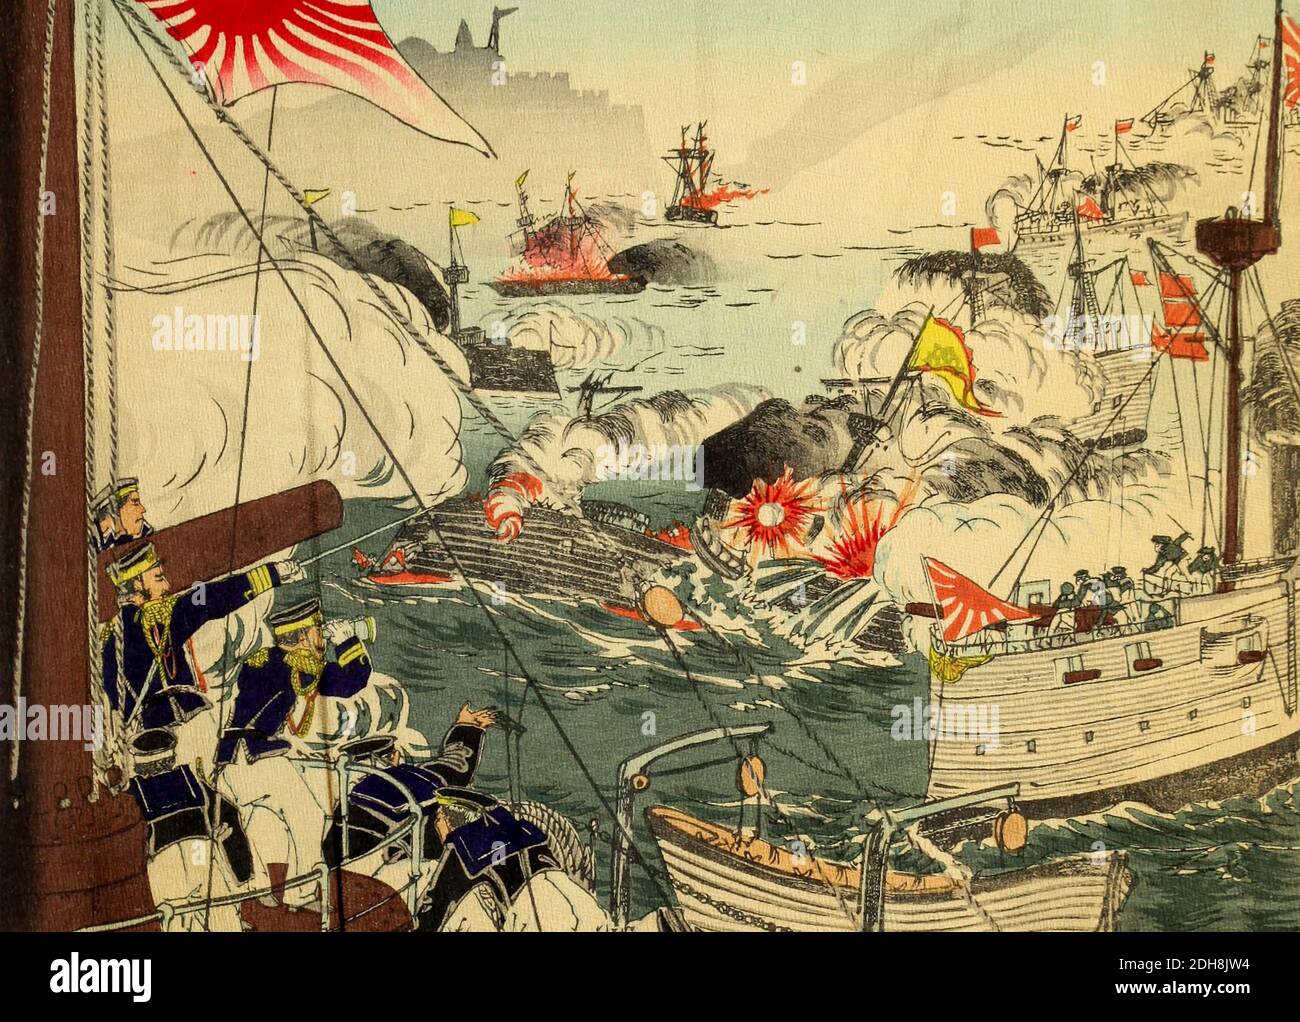 The Battle of the Yalu River was the largest naval engagement of the First Sino-Japanese War, and took place on 17 September 1894, the day after the Japanese victory at the land Battle of Pyongyang. It involved ships from the Imperial Japanese Navy and the Chinese Beiyang Fleet. The battle is also known by a variety of names: Battle of Haiyang Island, Battle of Dadonggou, Battle of the Yellow Sea and Battle of Yalu. From the book 'Scenes from the Japan-China War' by Inouye, Jukichi, 1862-1929; Yamamoto, Eiki, illustrator. Published in Tokyo in 1895 with English Text. The First Sino-Japanese Wa Stock Photo